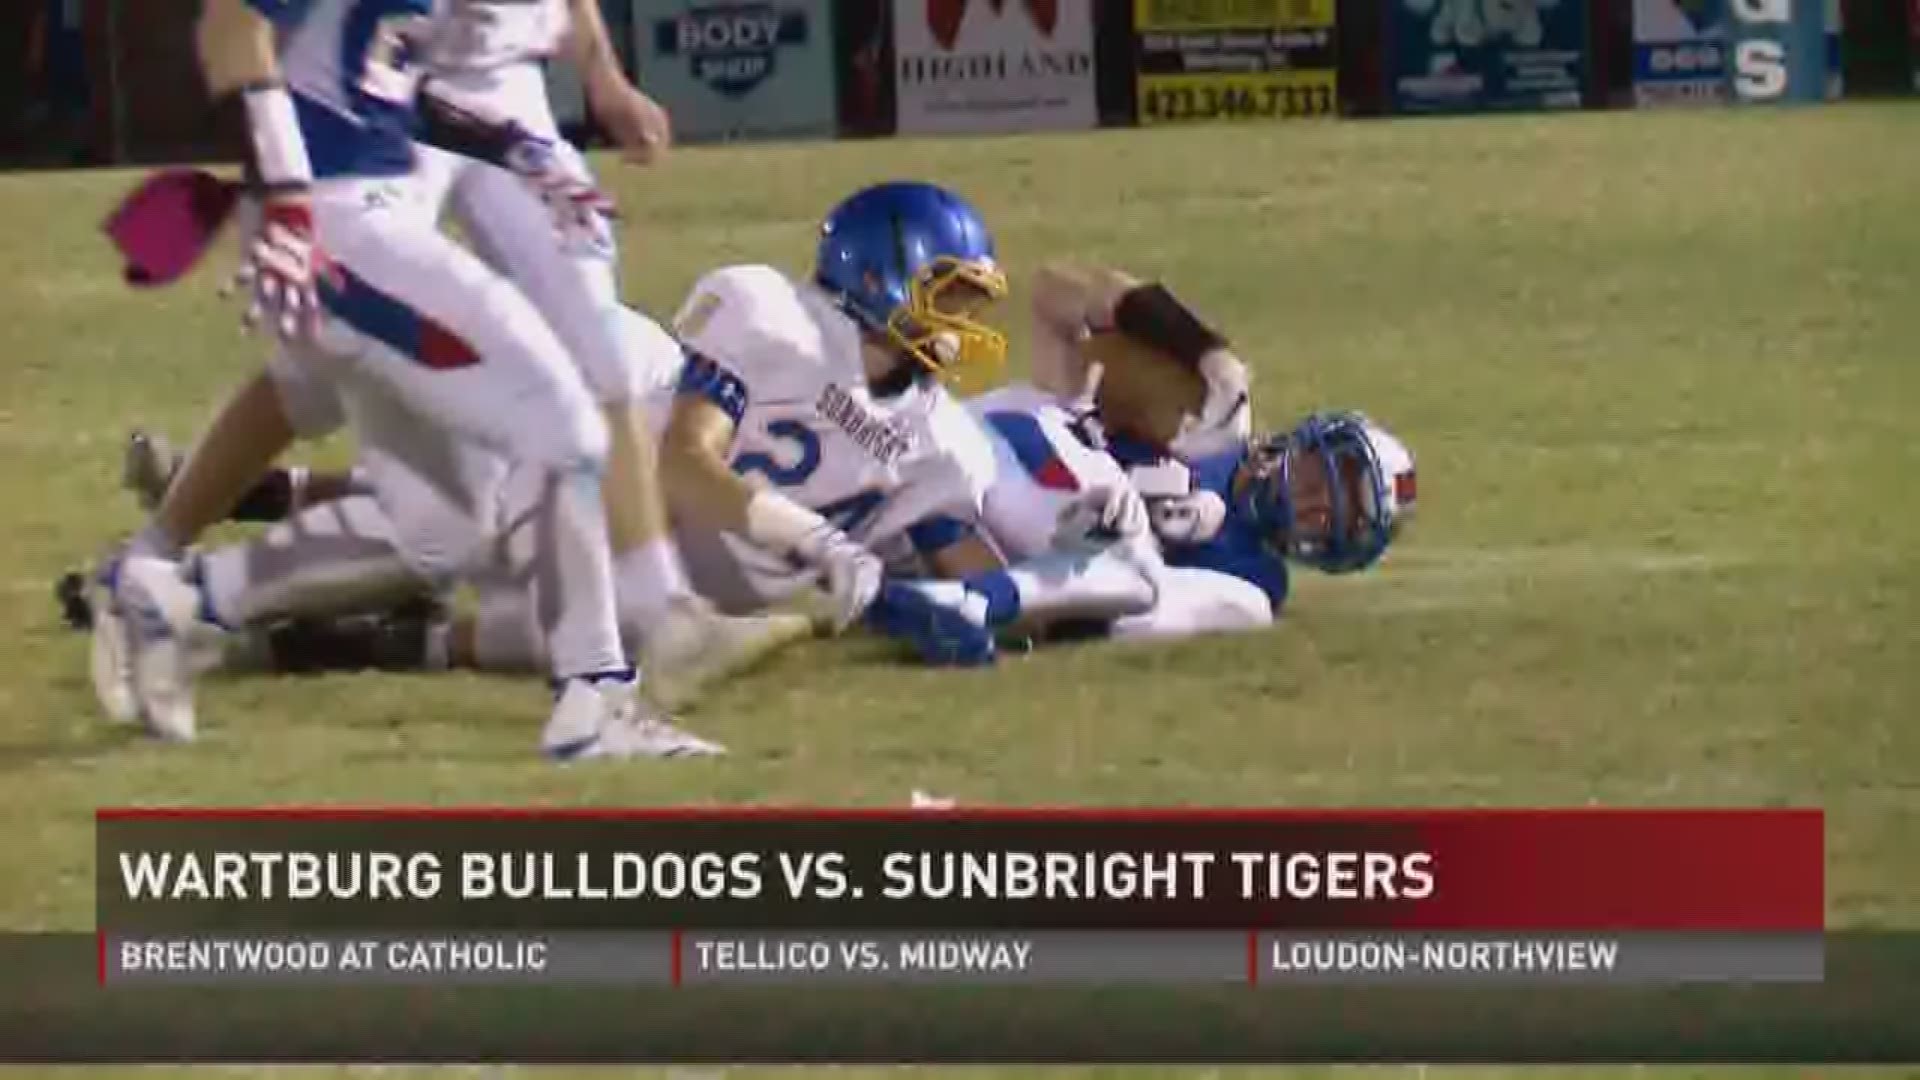 Sunbright moves to 3-2 on the season.